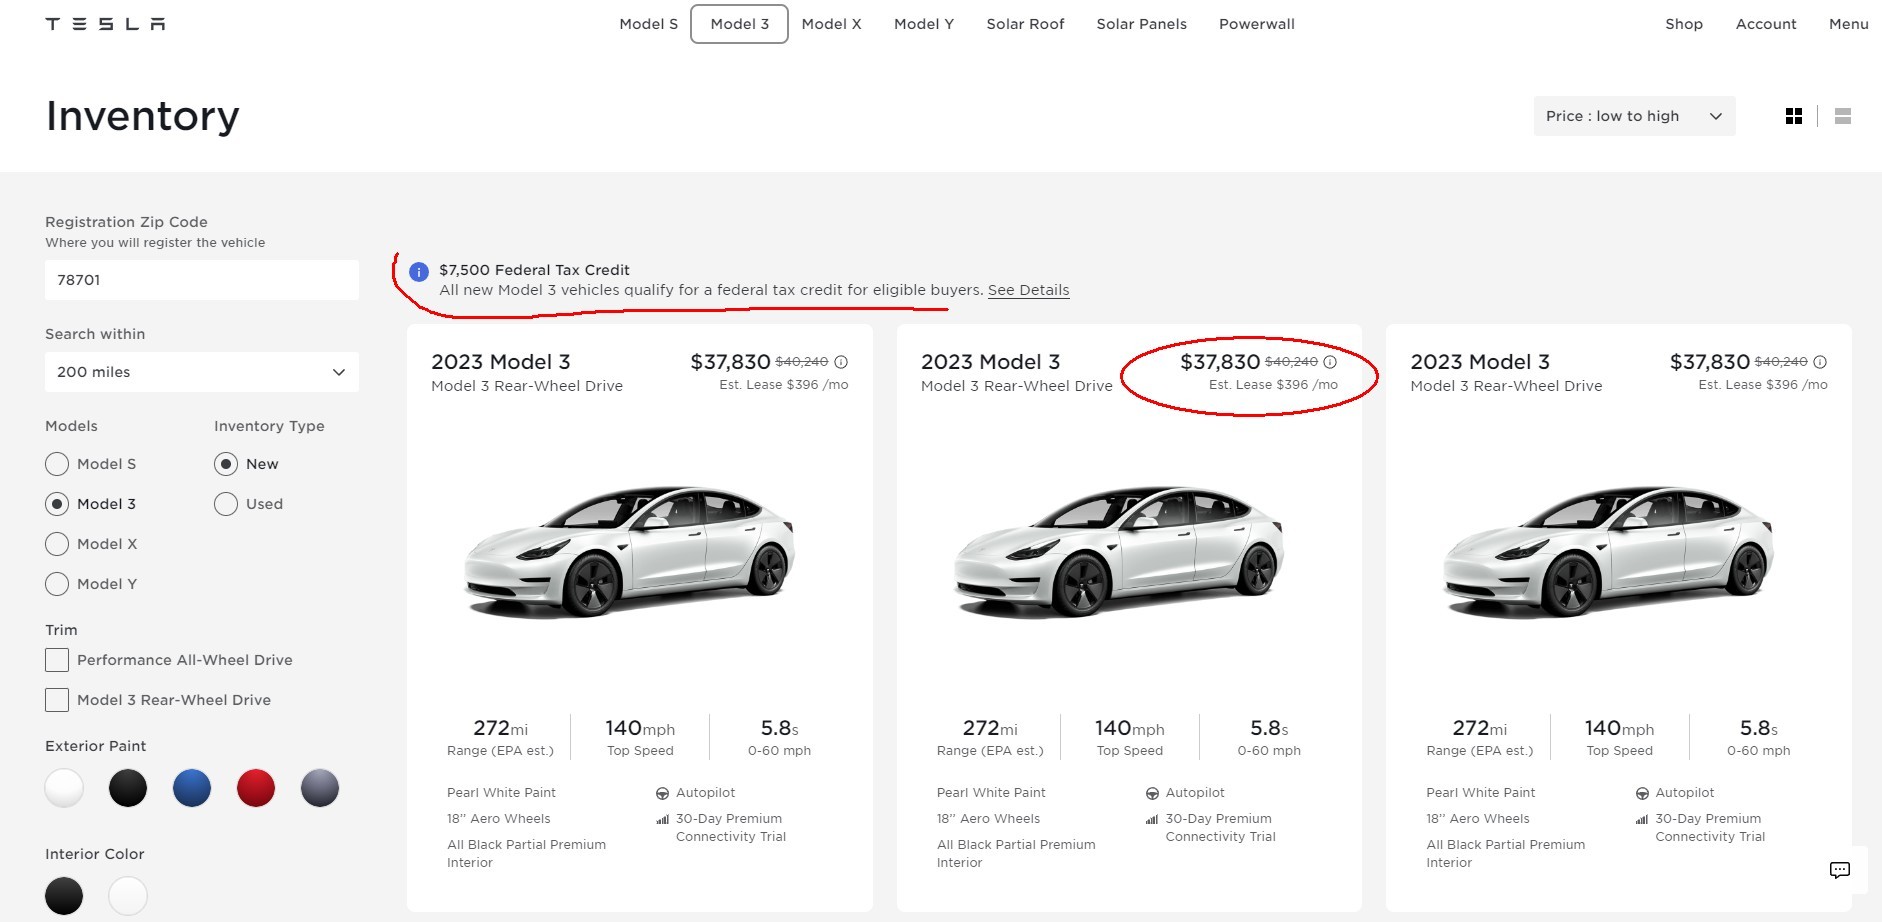 How Tesla Bent IRA Rules To Get Full 7,500 Tax Credit for Model 3 RWD